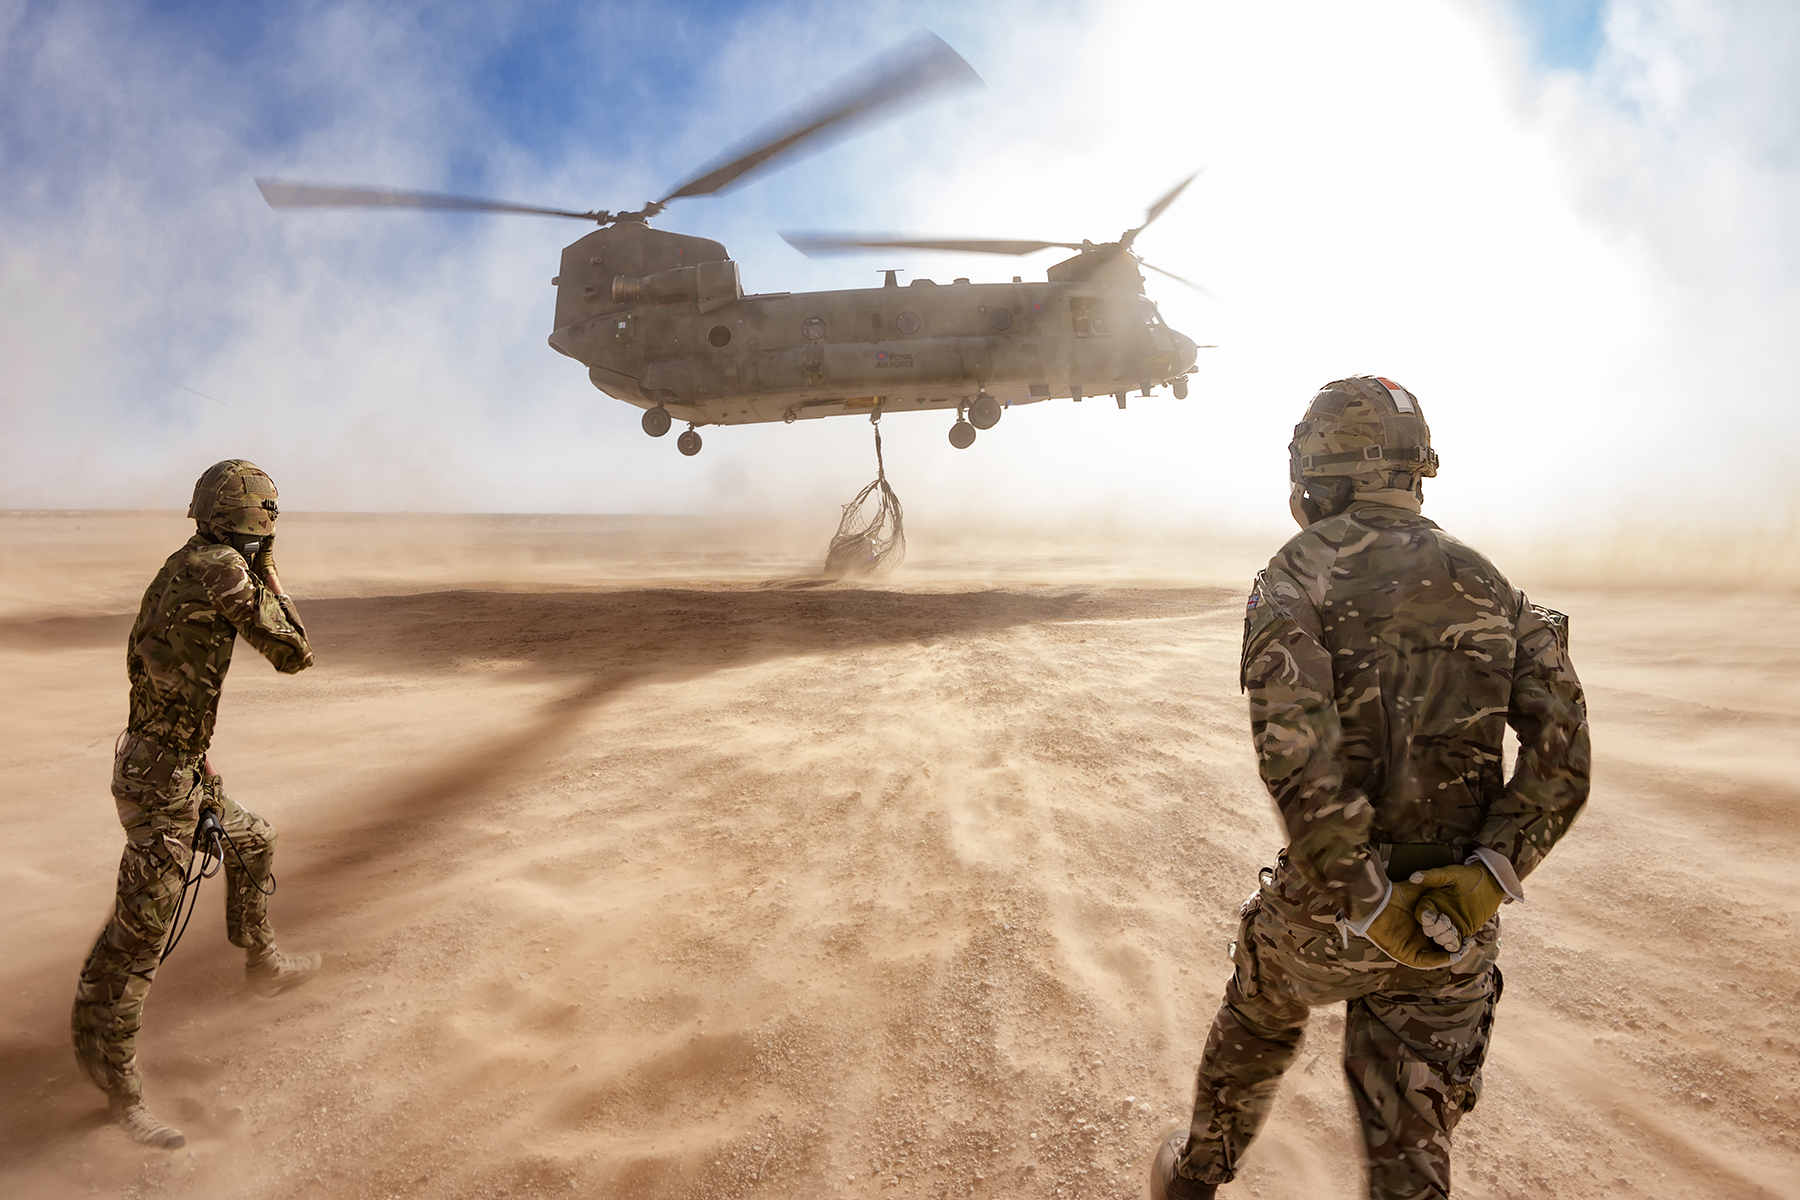 Image shows aviators looking towards helicopter carrying under-slung load in the desert.